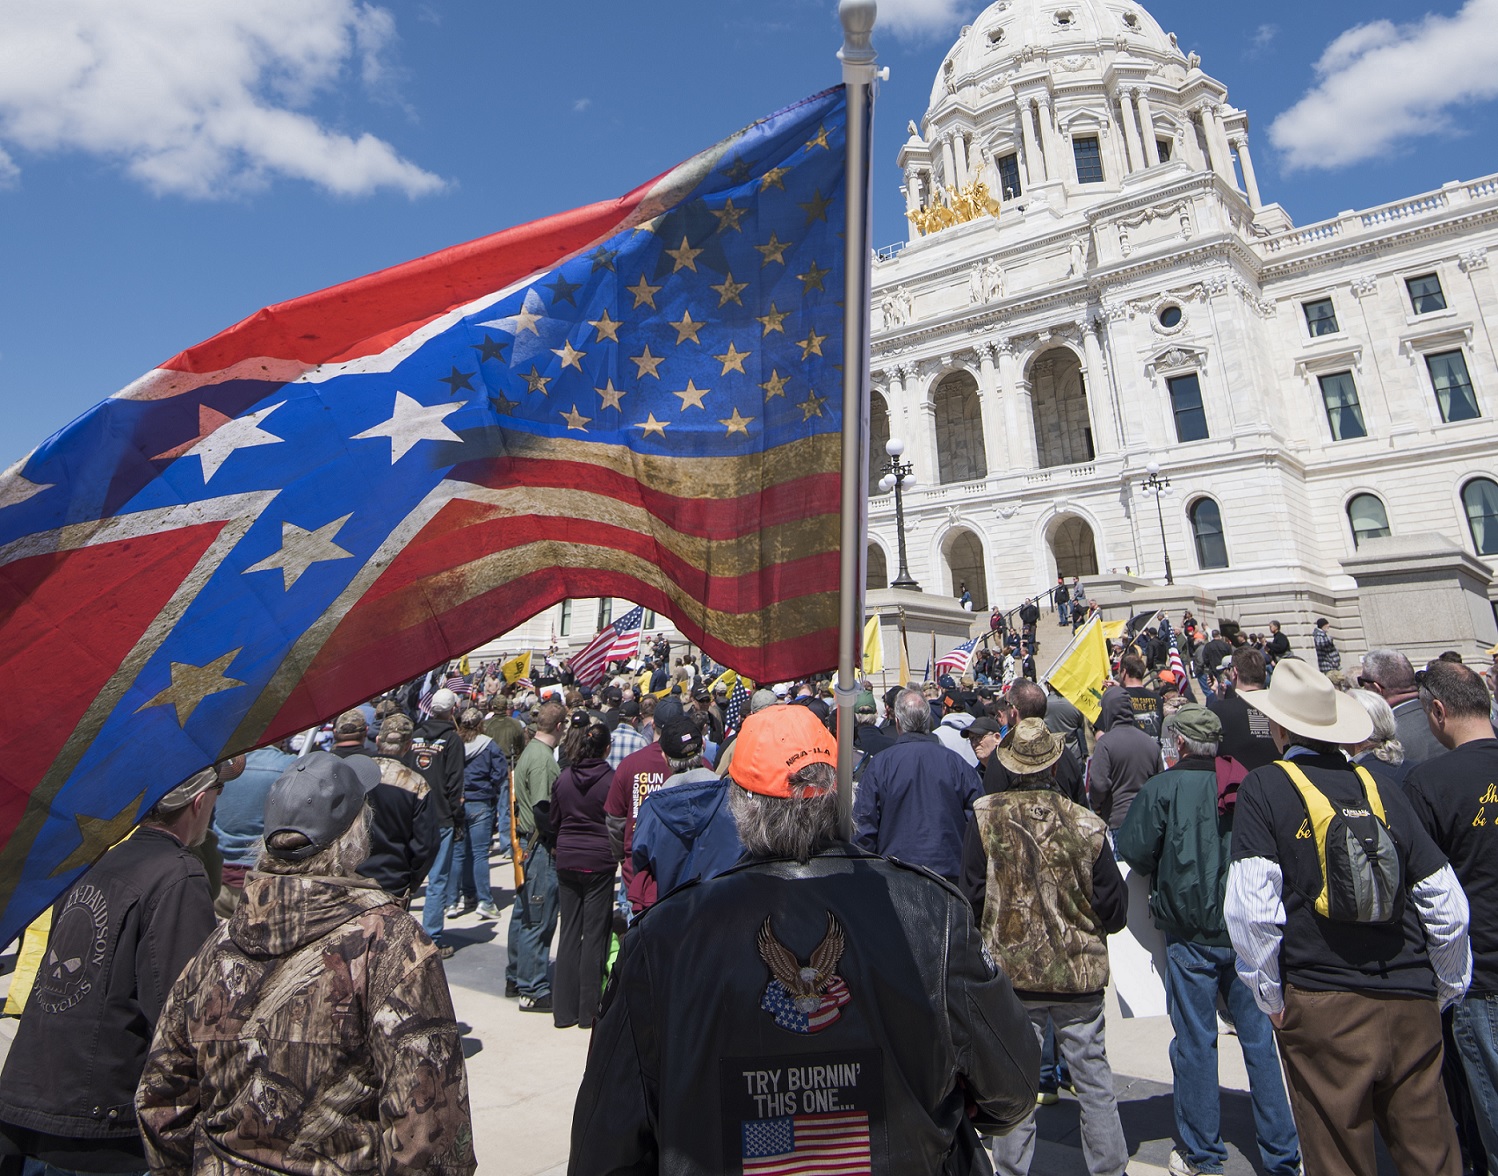 A crowd of people , one of whom carries a large flag merging the Confederate flag and the American flag into a single design.